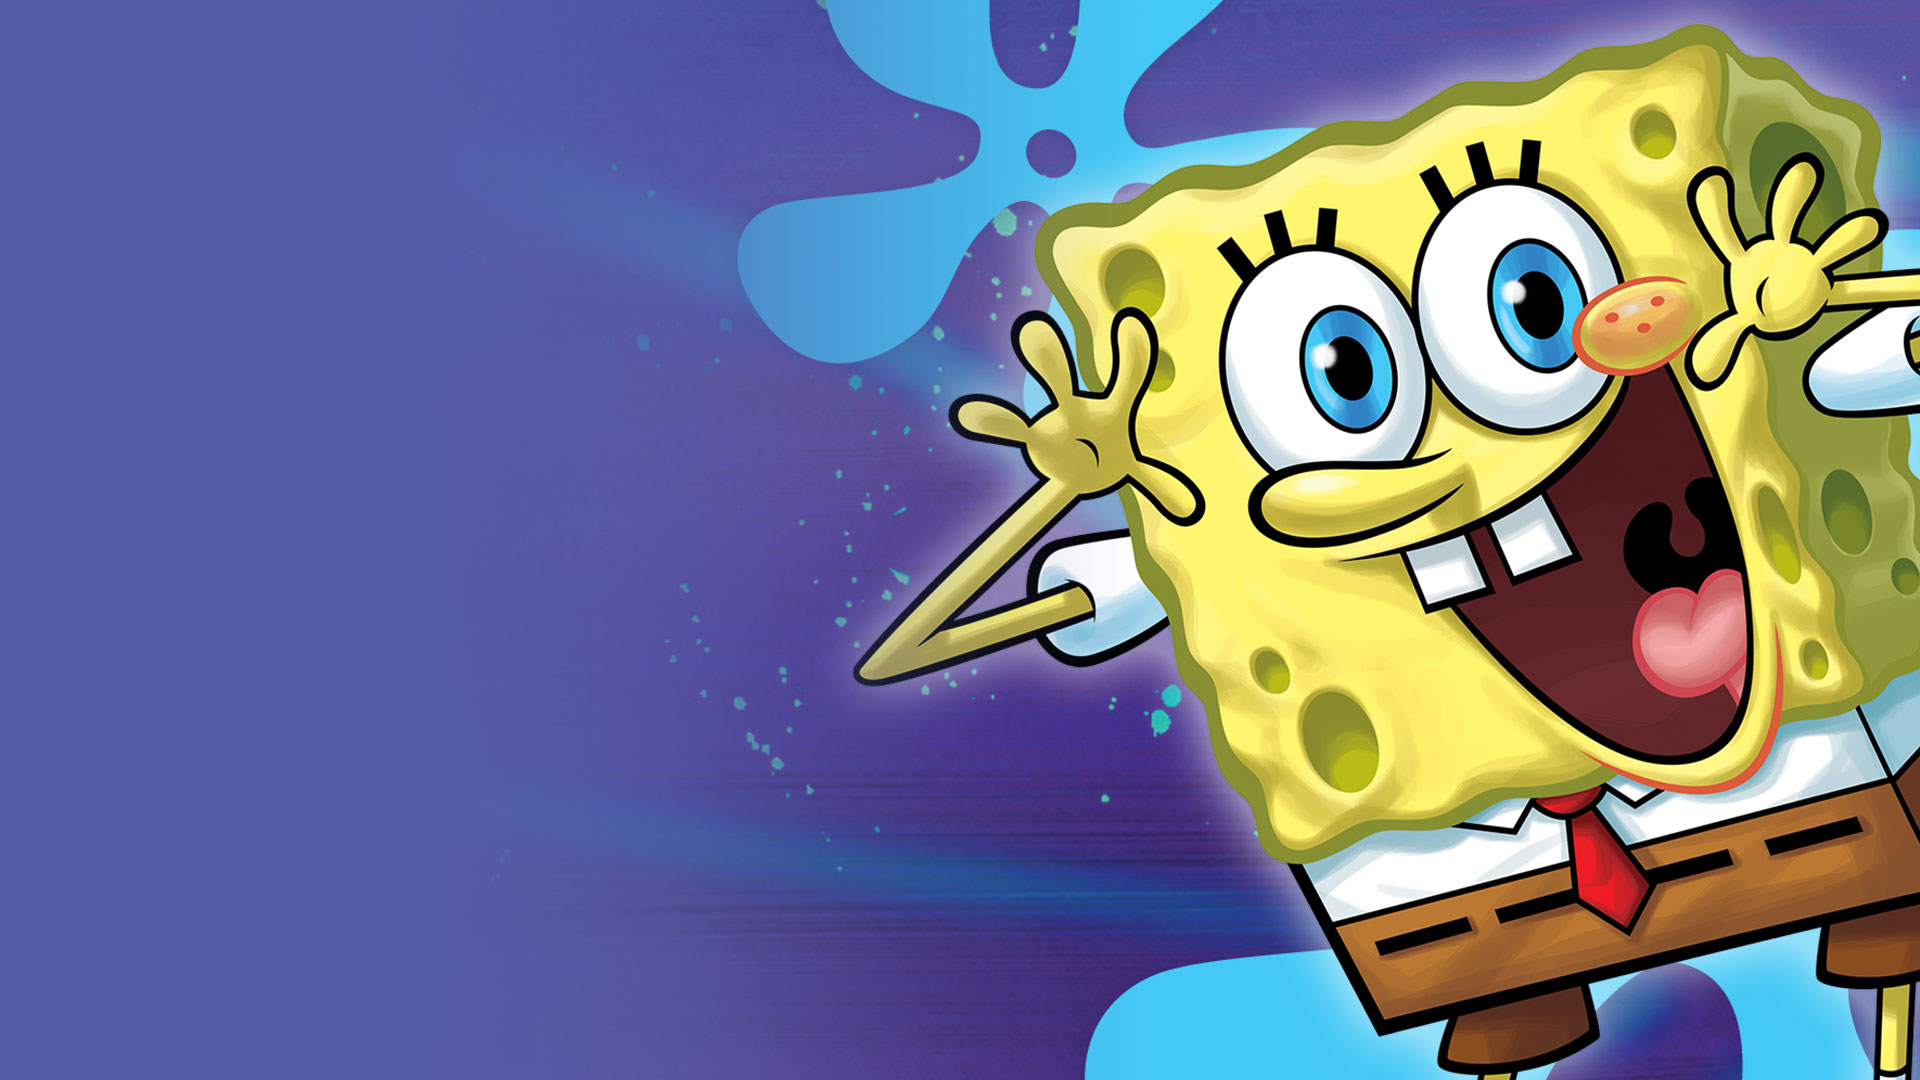 Frankie Grande And Hector Navarro Get Us Hyped For Their New Podcast SpongeBob BingePants [Exclusive Interview]